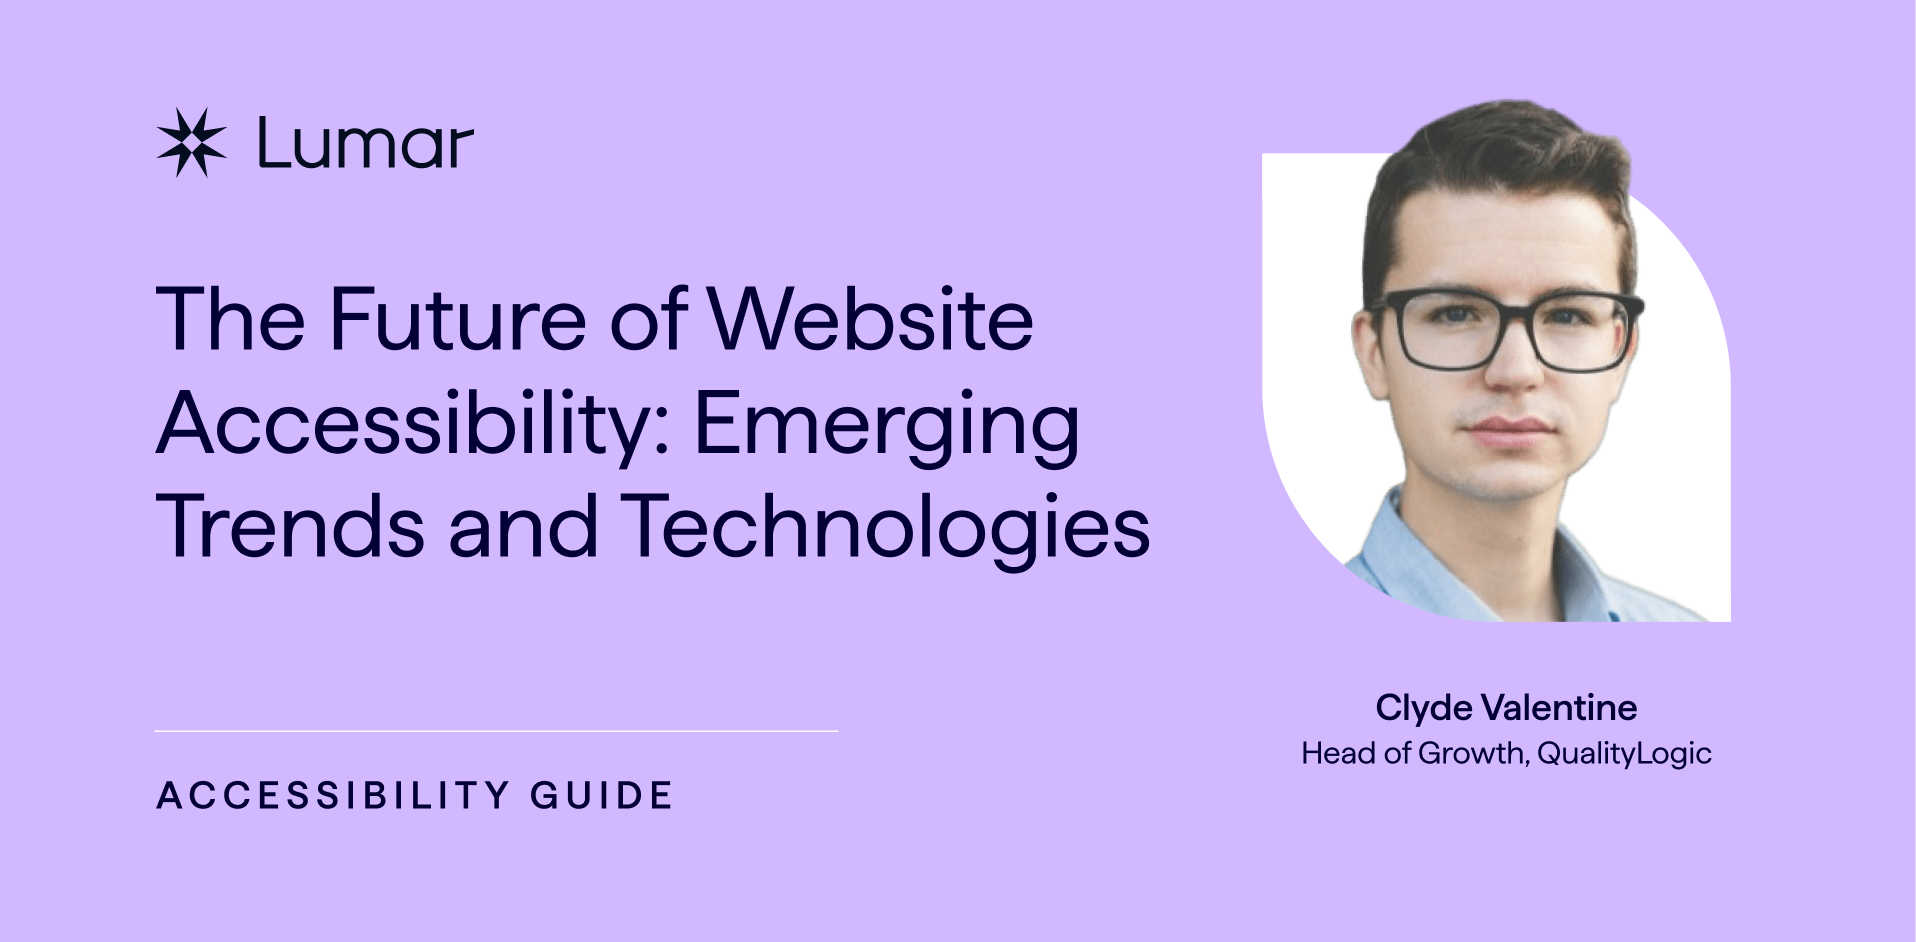 The Future of Website Accessibility: Emerging Trends and Technologies